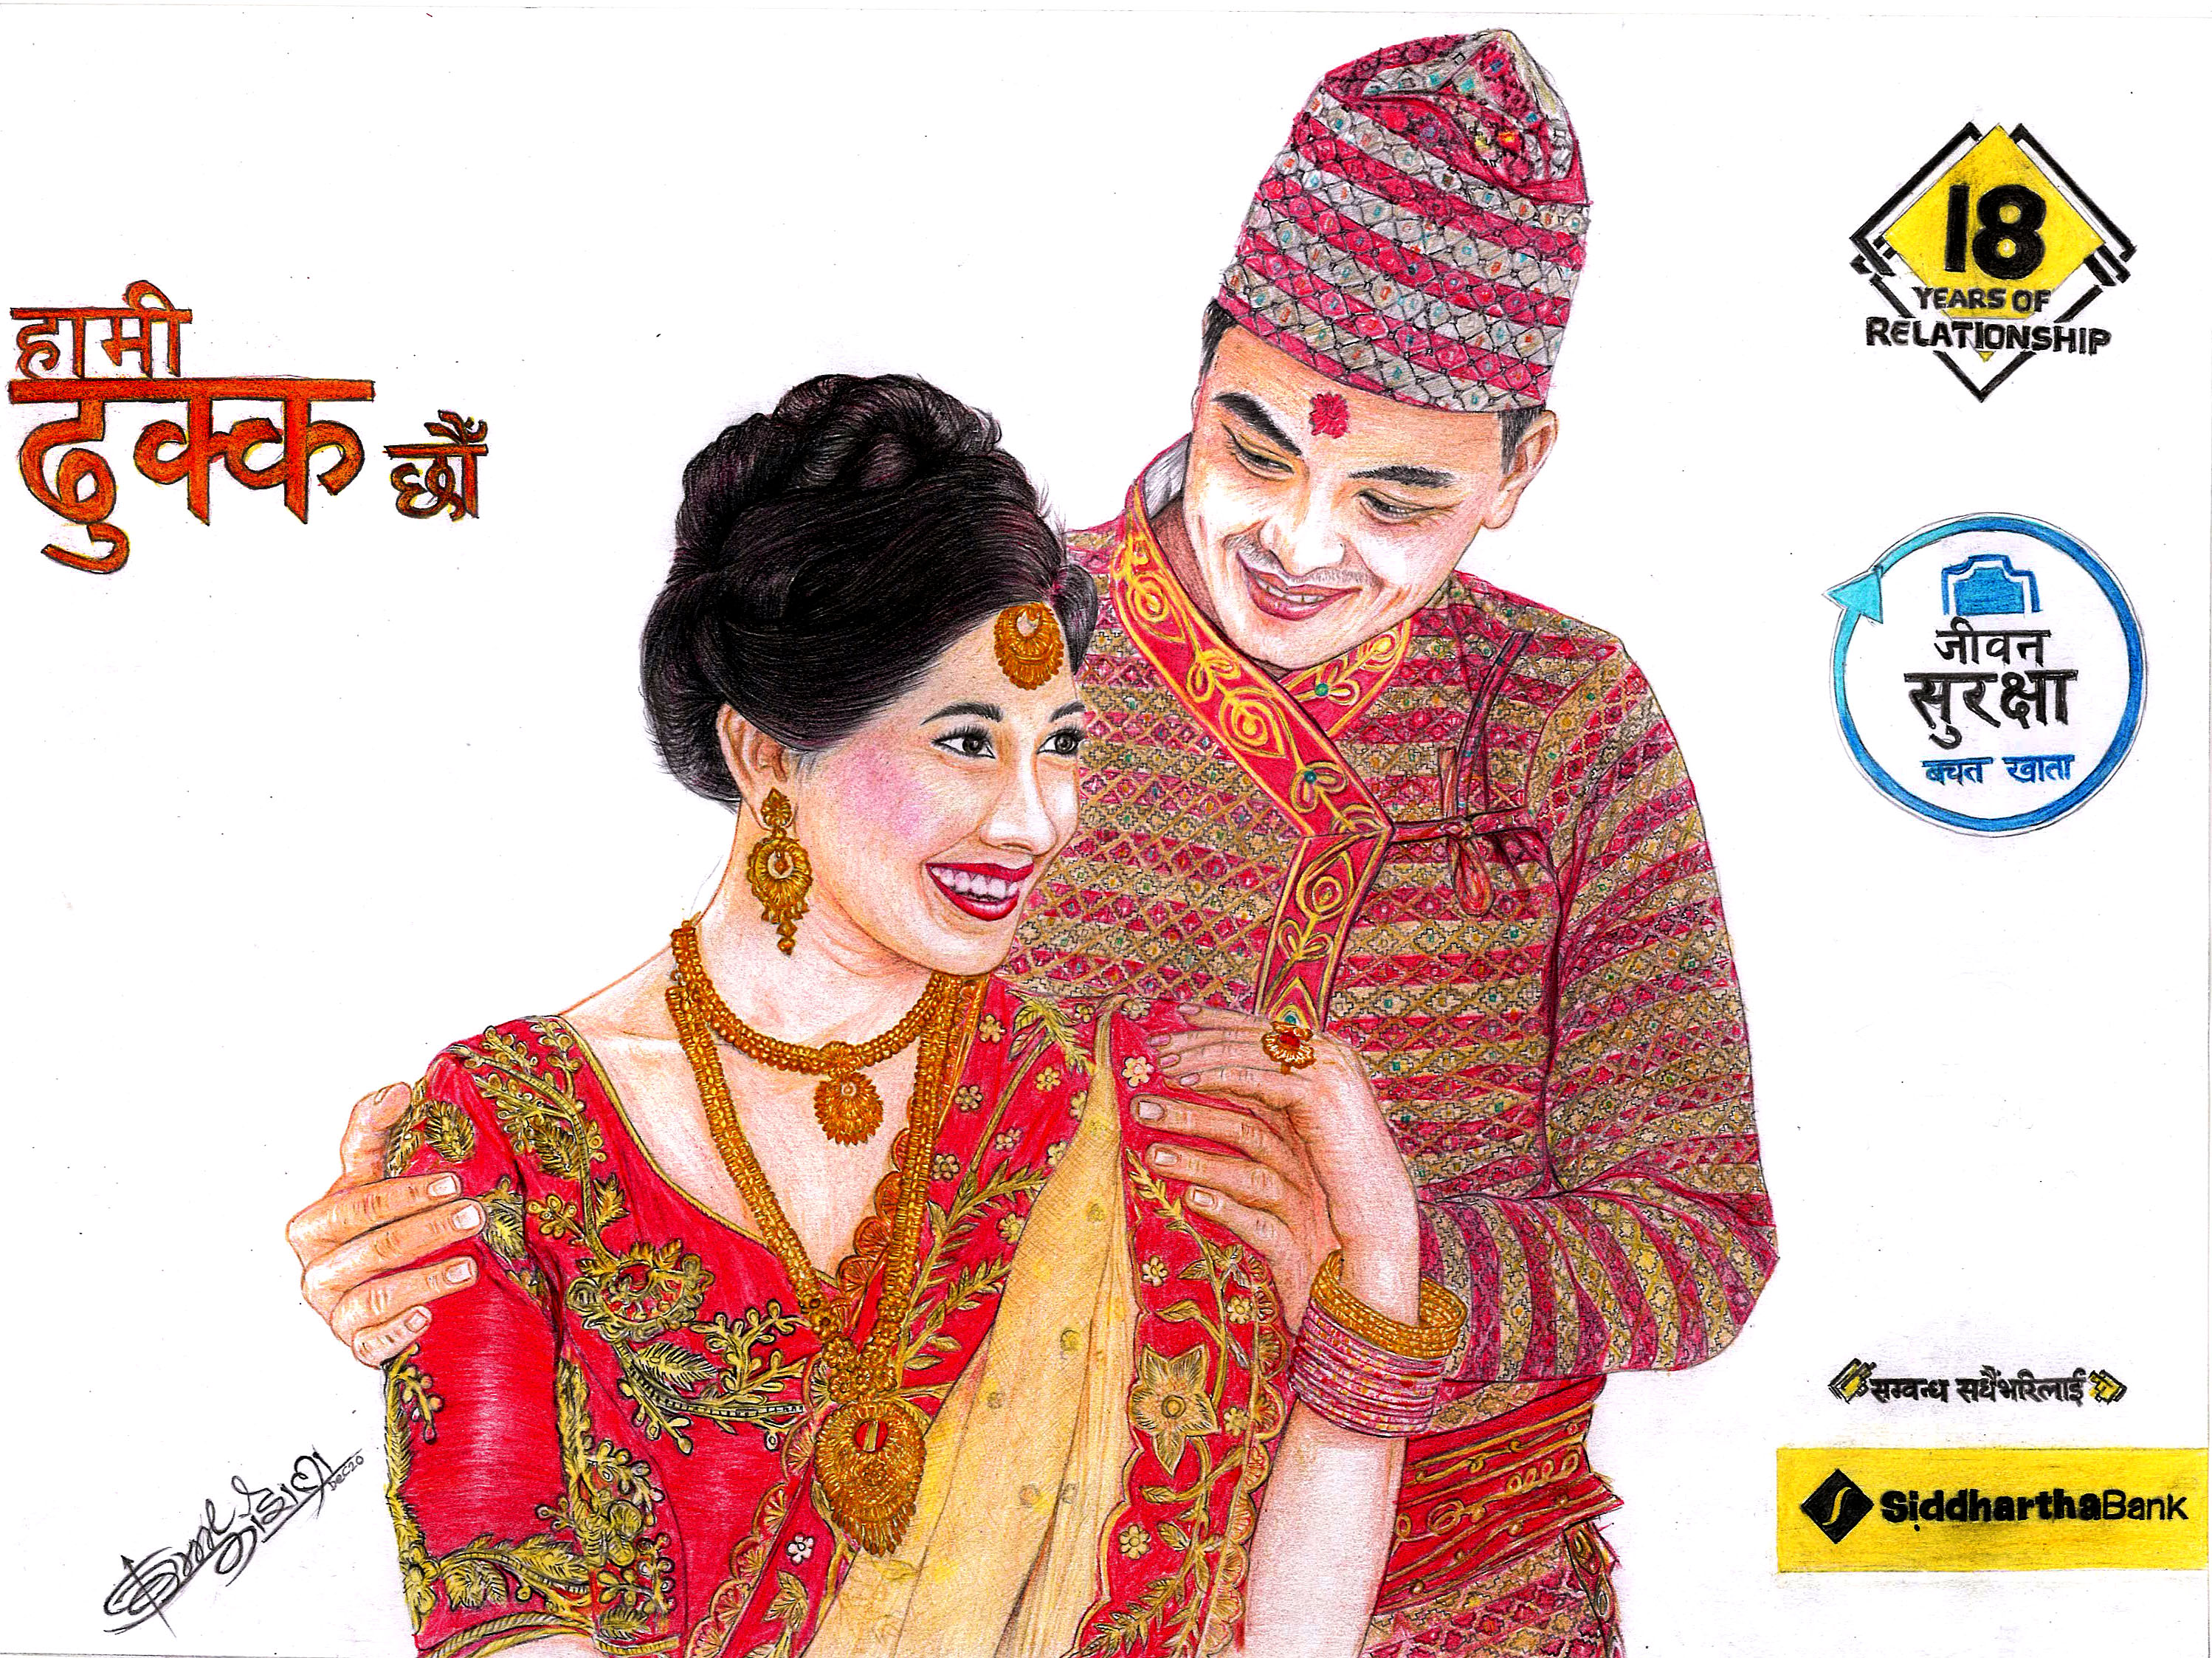 18th Anniversary Staff Engagement Campaign - Sketch Competition